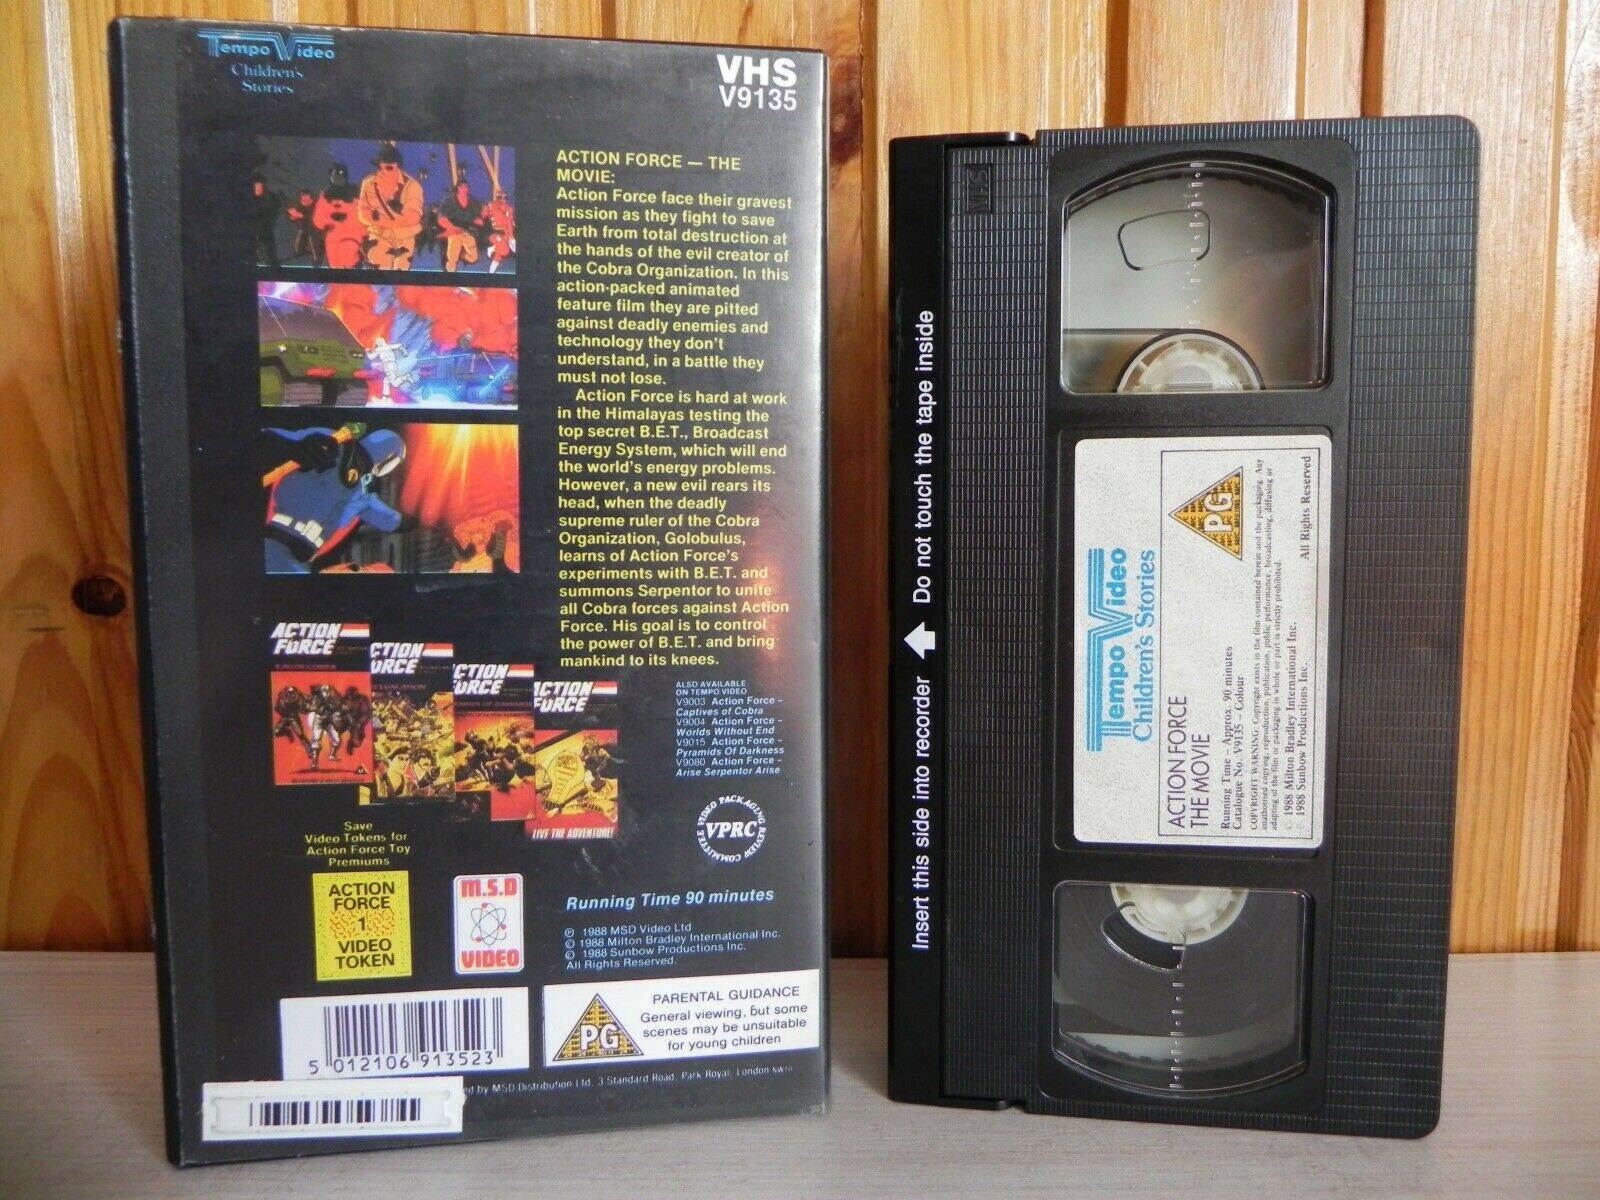 Action Force - International Heroes - The Movie - Live The Adventure - Pal VHS-